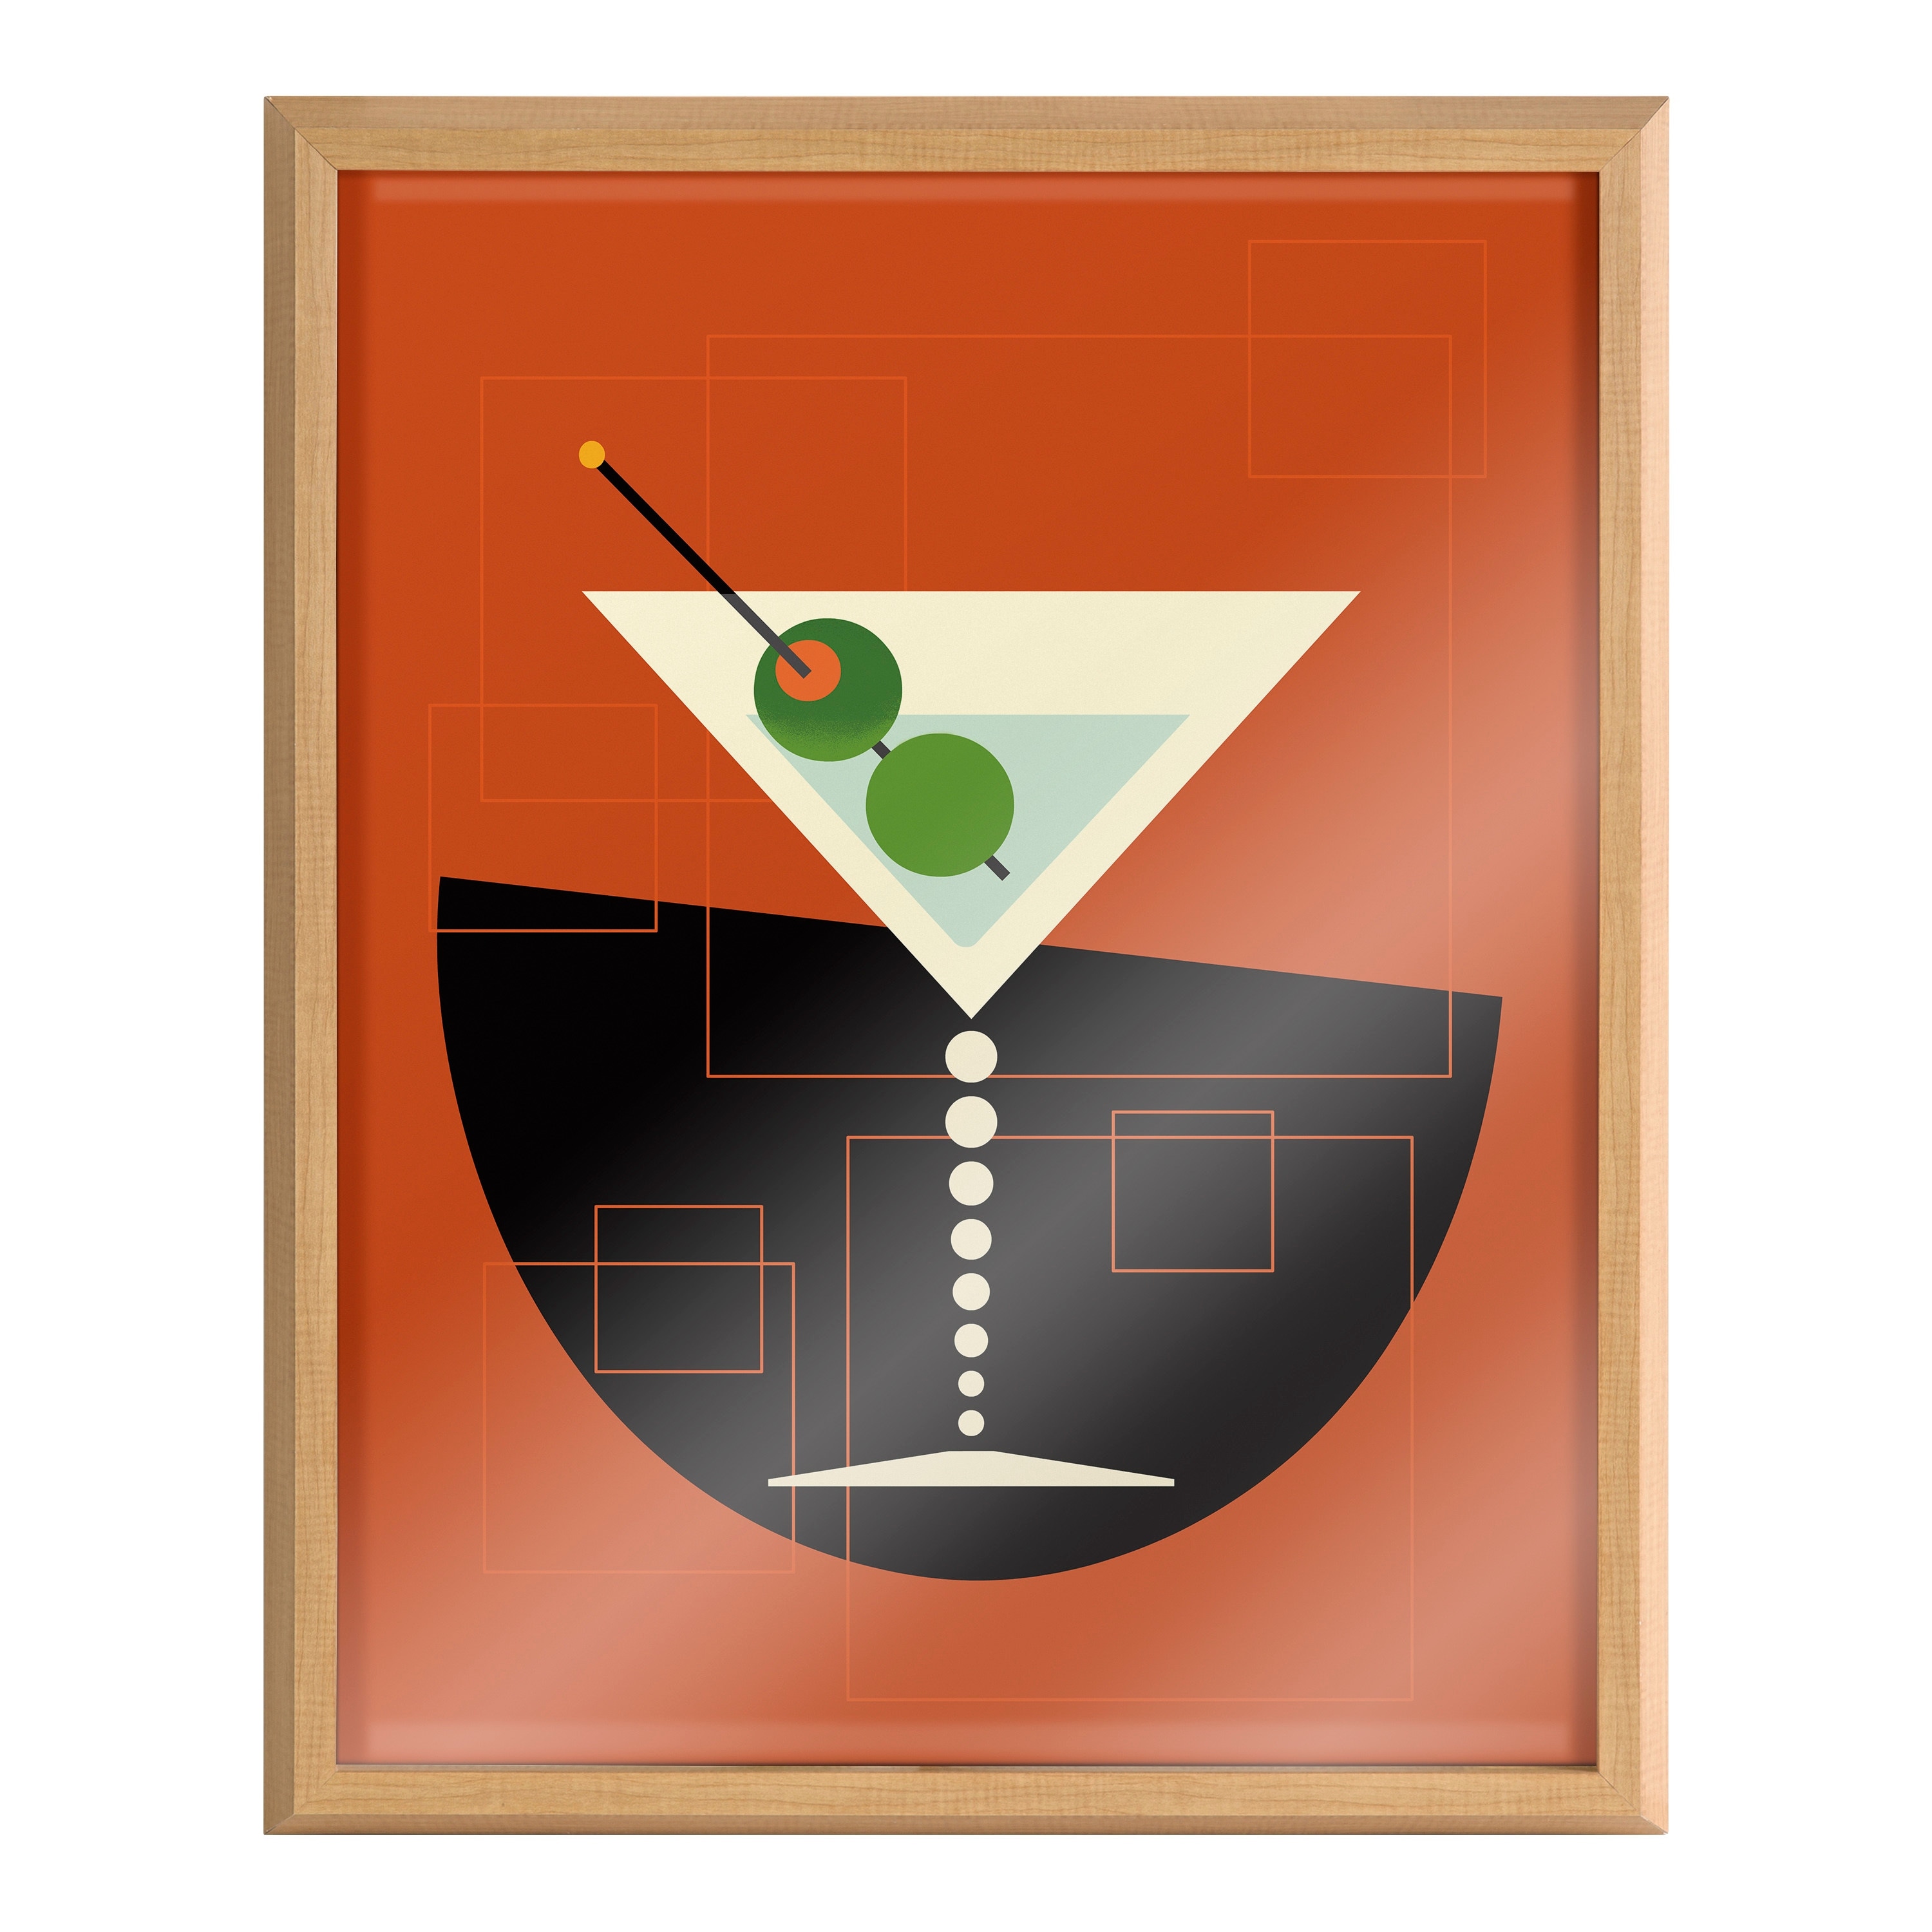 Kate and Laurel Blake Gold, Cocktail Wall Leaders Art Amber Dark Chic  Framed Old Glass Fashioned Decor Designs, Printed by Wall 16x20 Mid-Century 